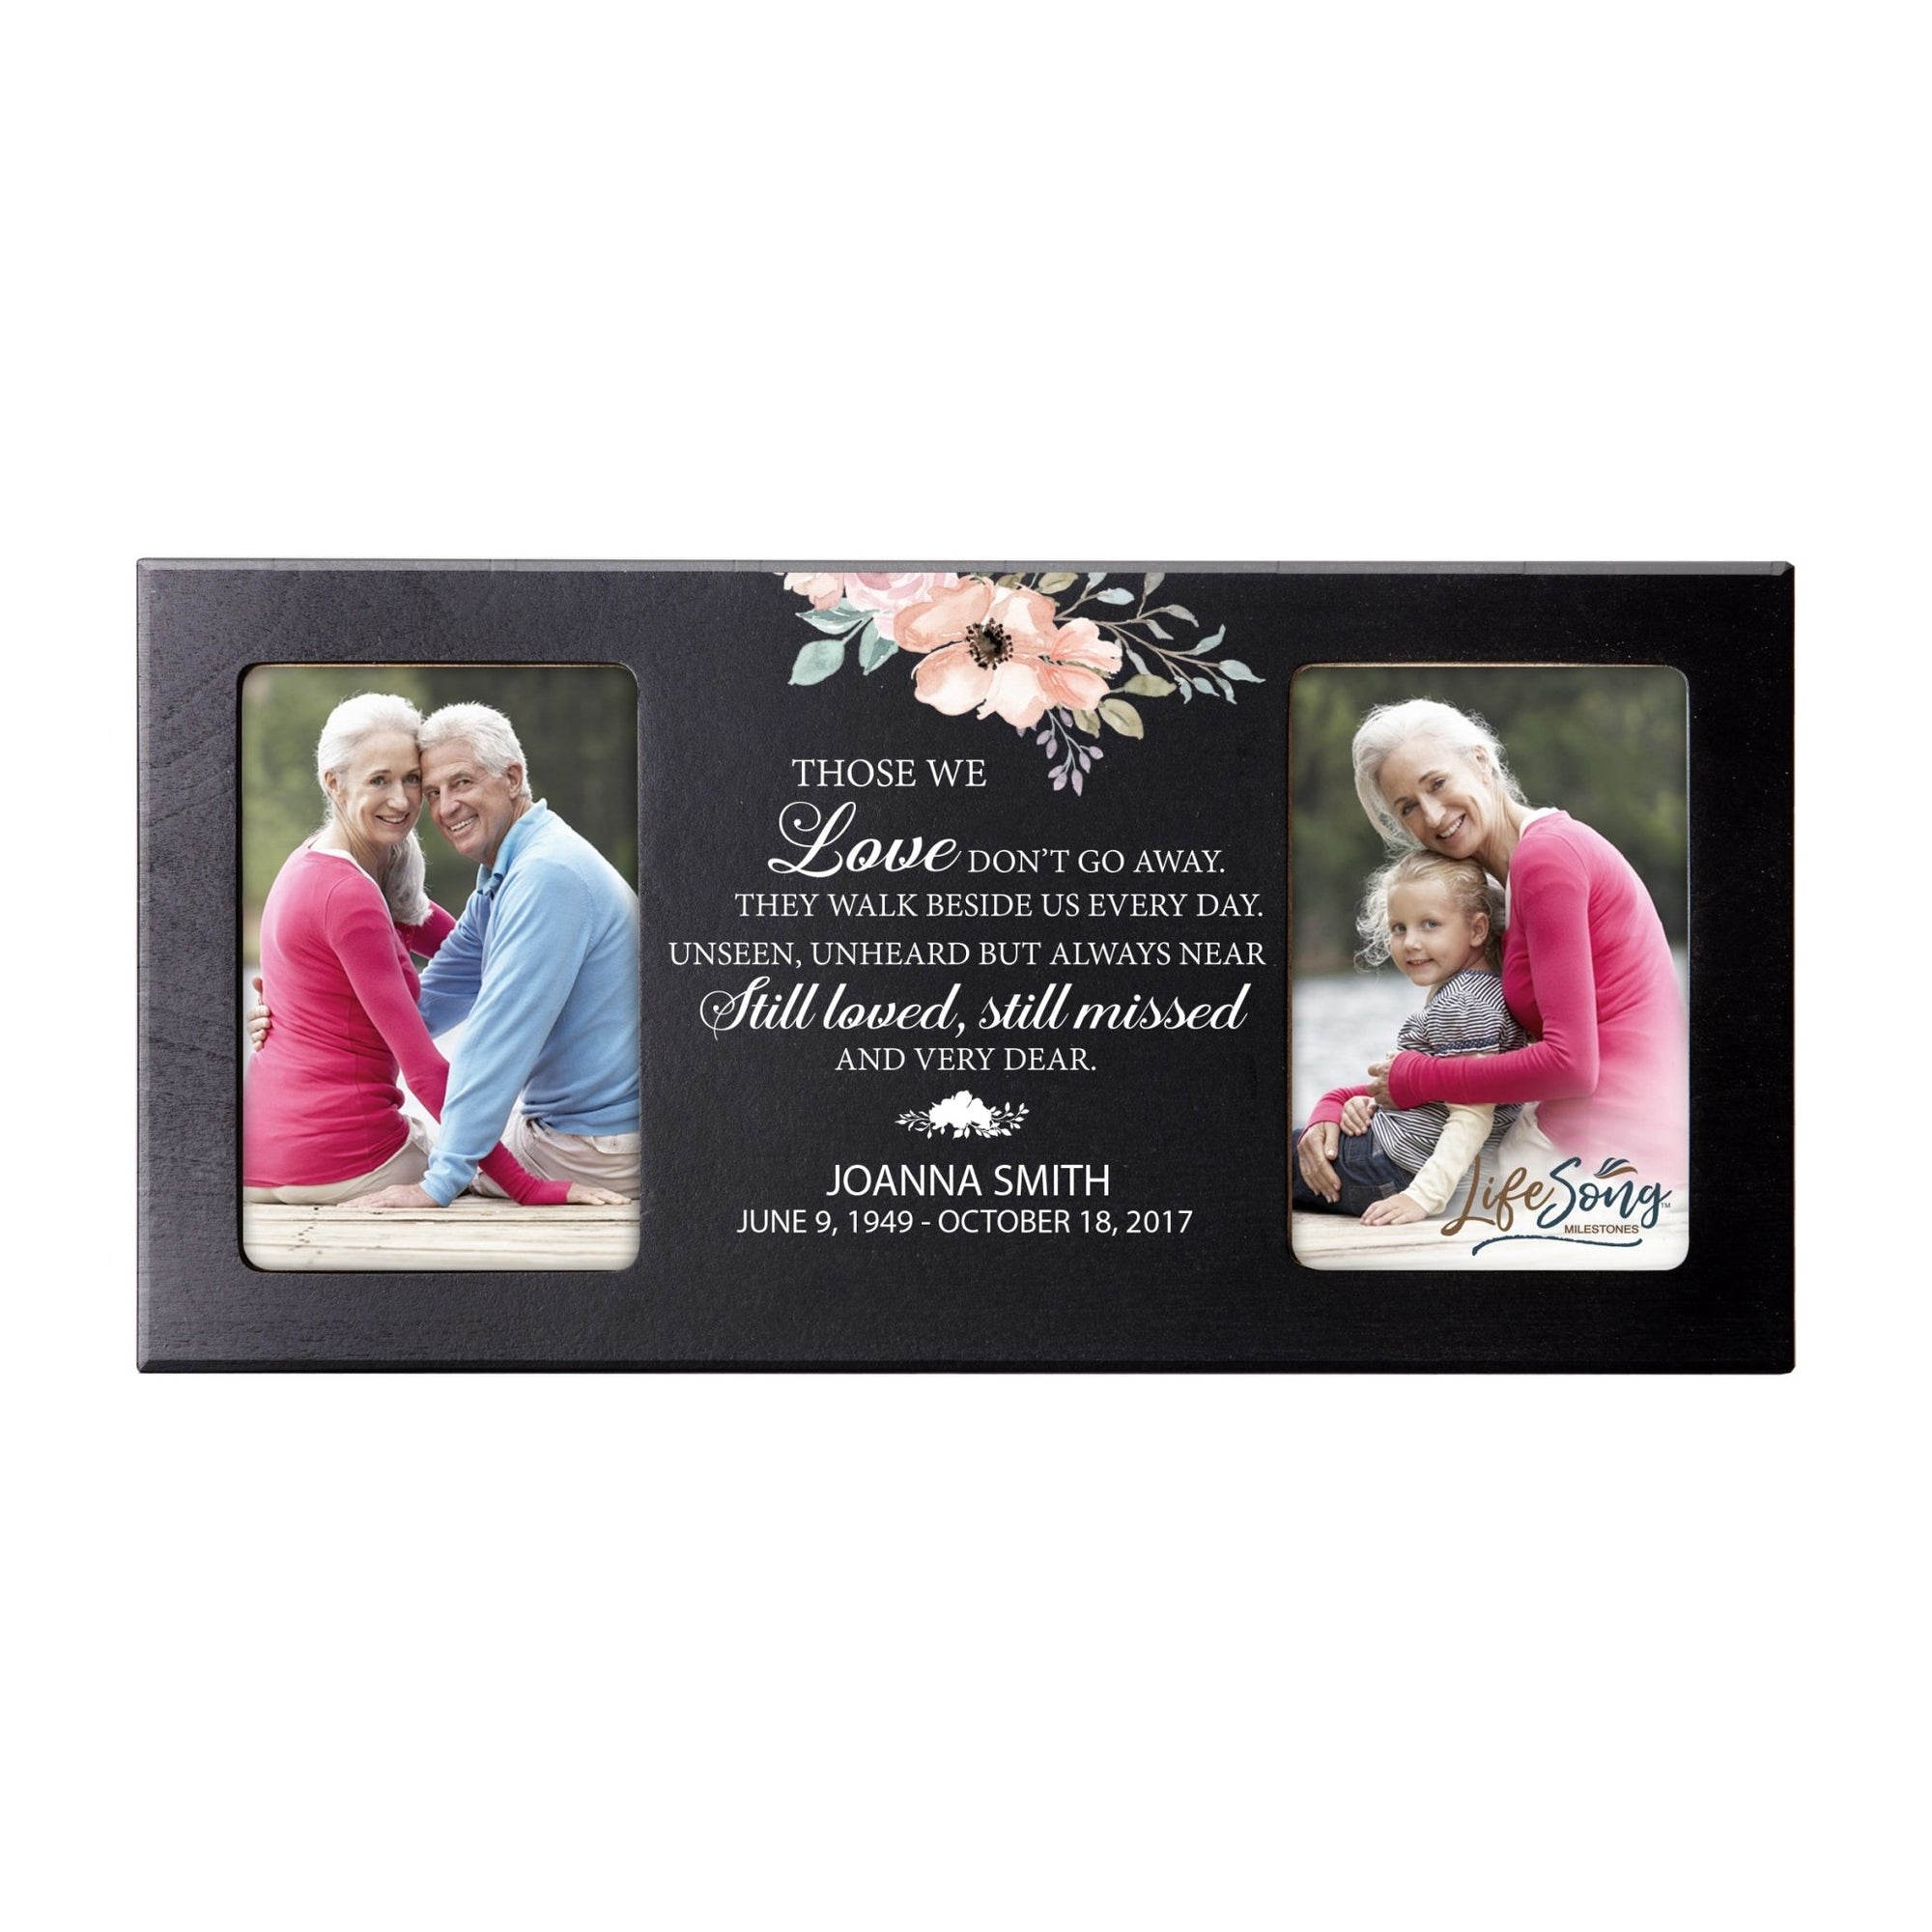 Custom Memorial Picture Frame 16x8in Holds Two 4x6in Photos - Those We Love Don’t Go - LifeSong Milestones